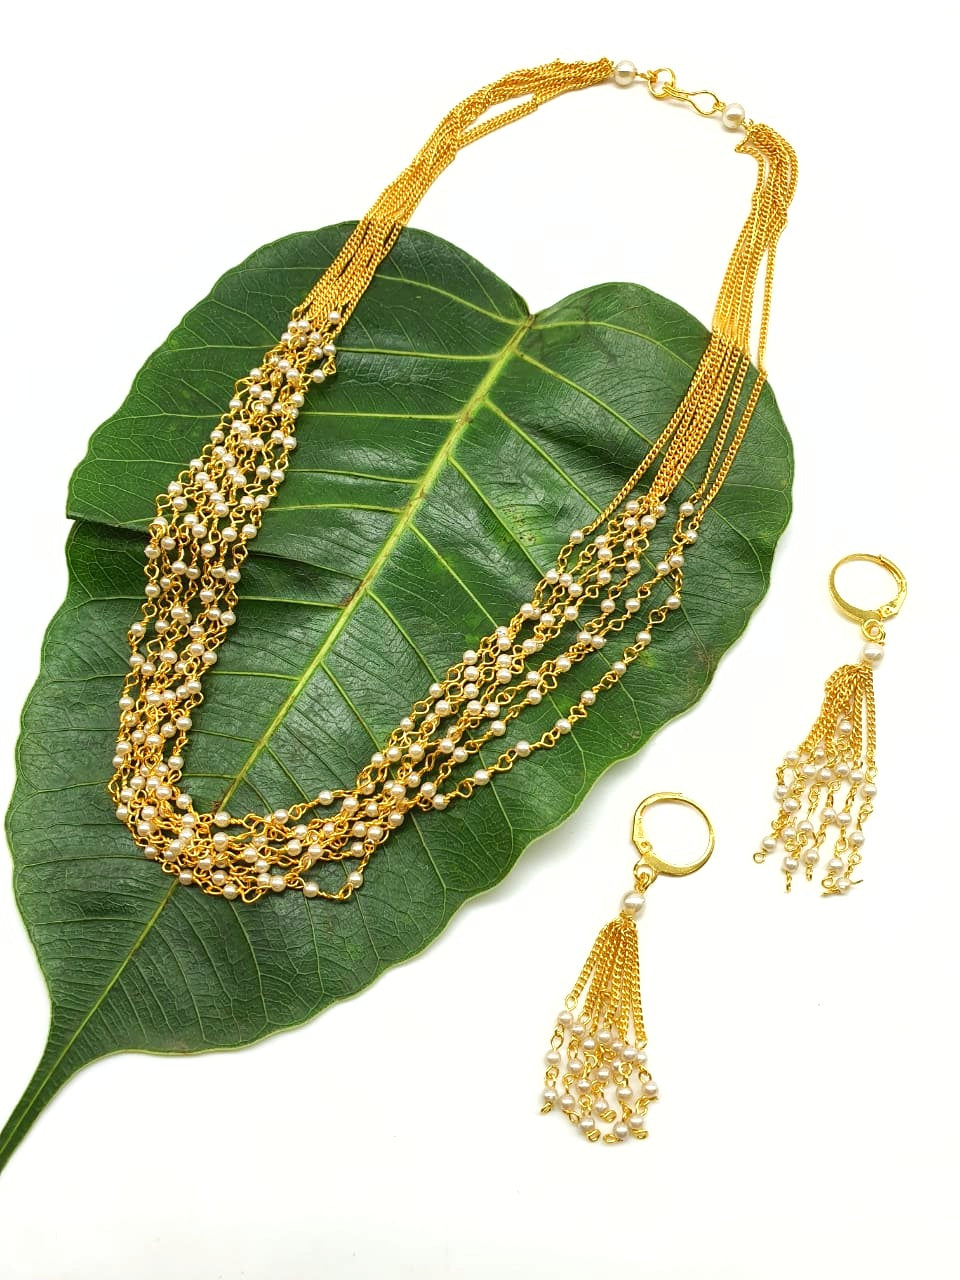 Digital Dress Room Gold Plated Jewelry Set with Multi Layer Gundla White Pearl Necklace with Hook Earrings